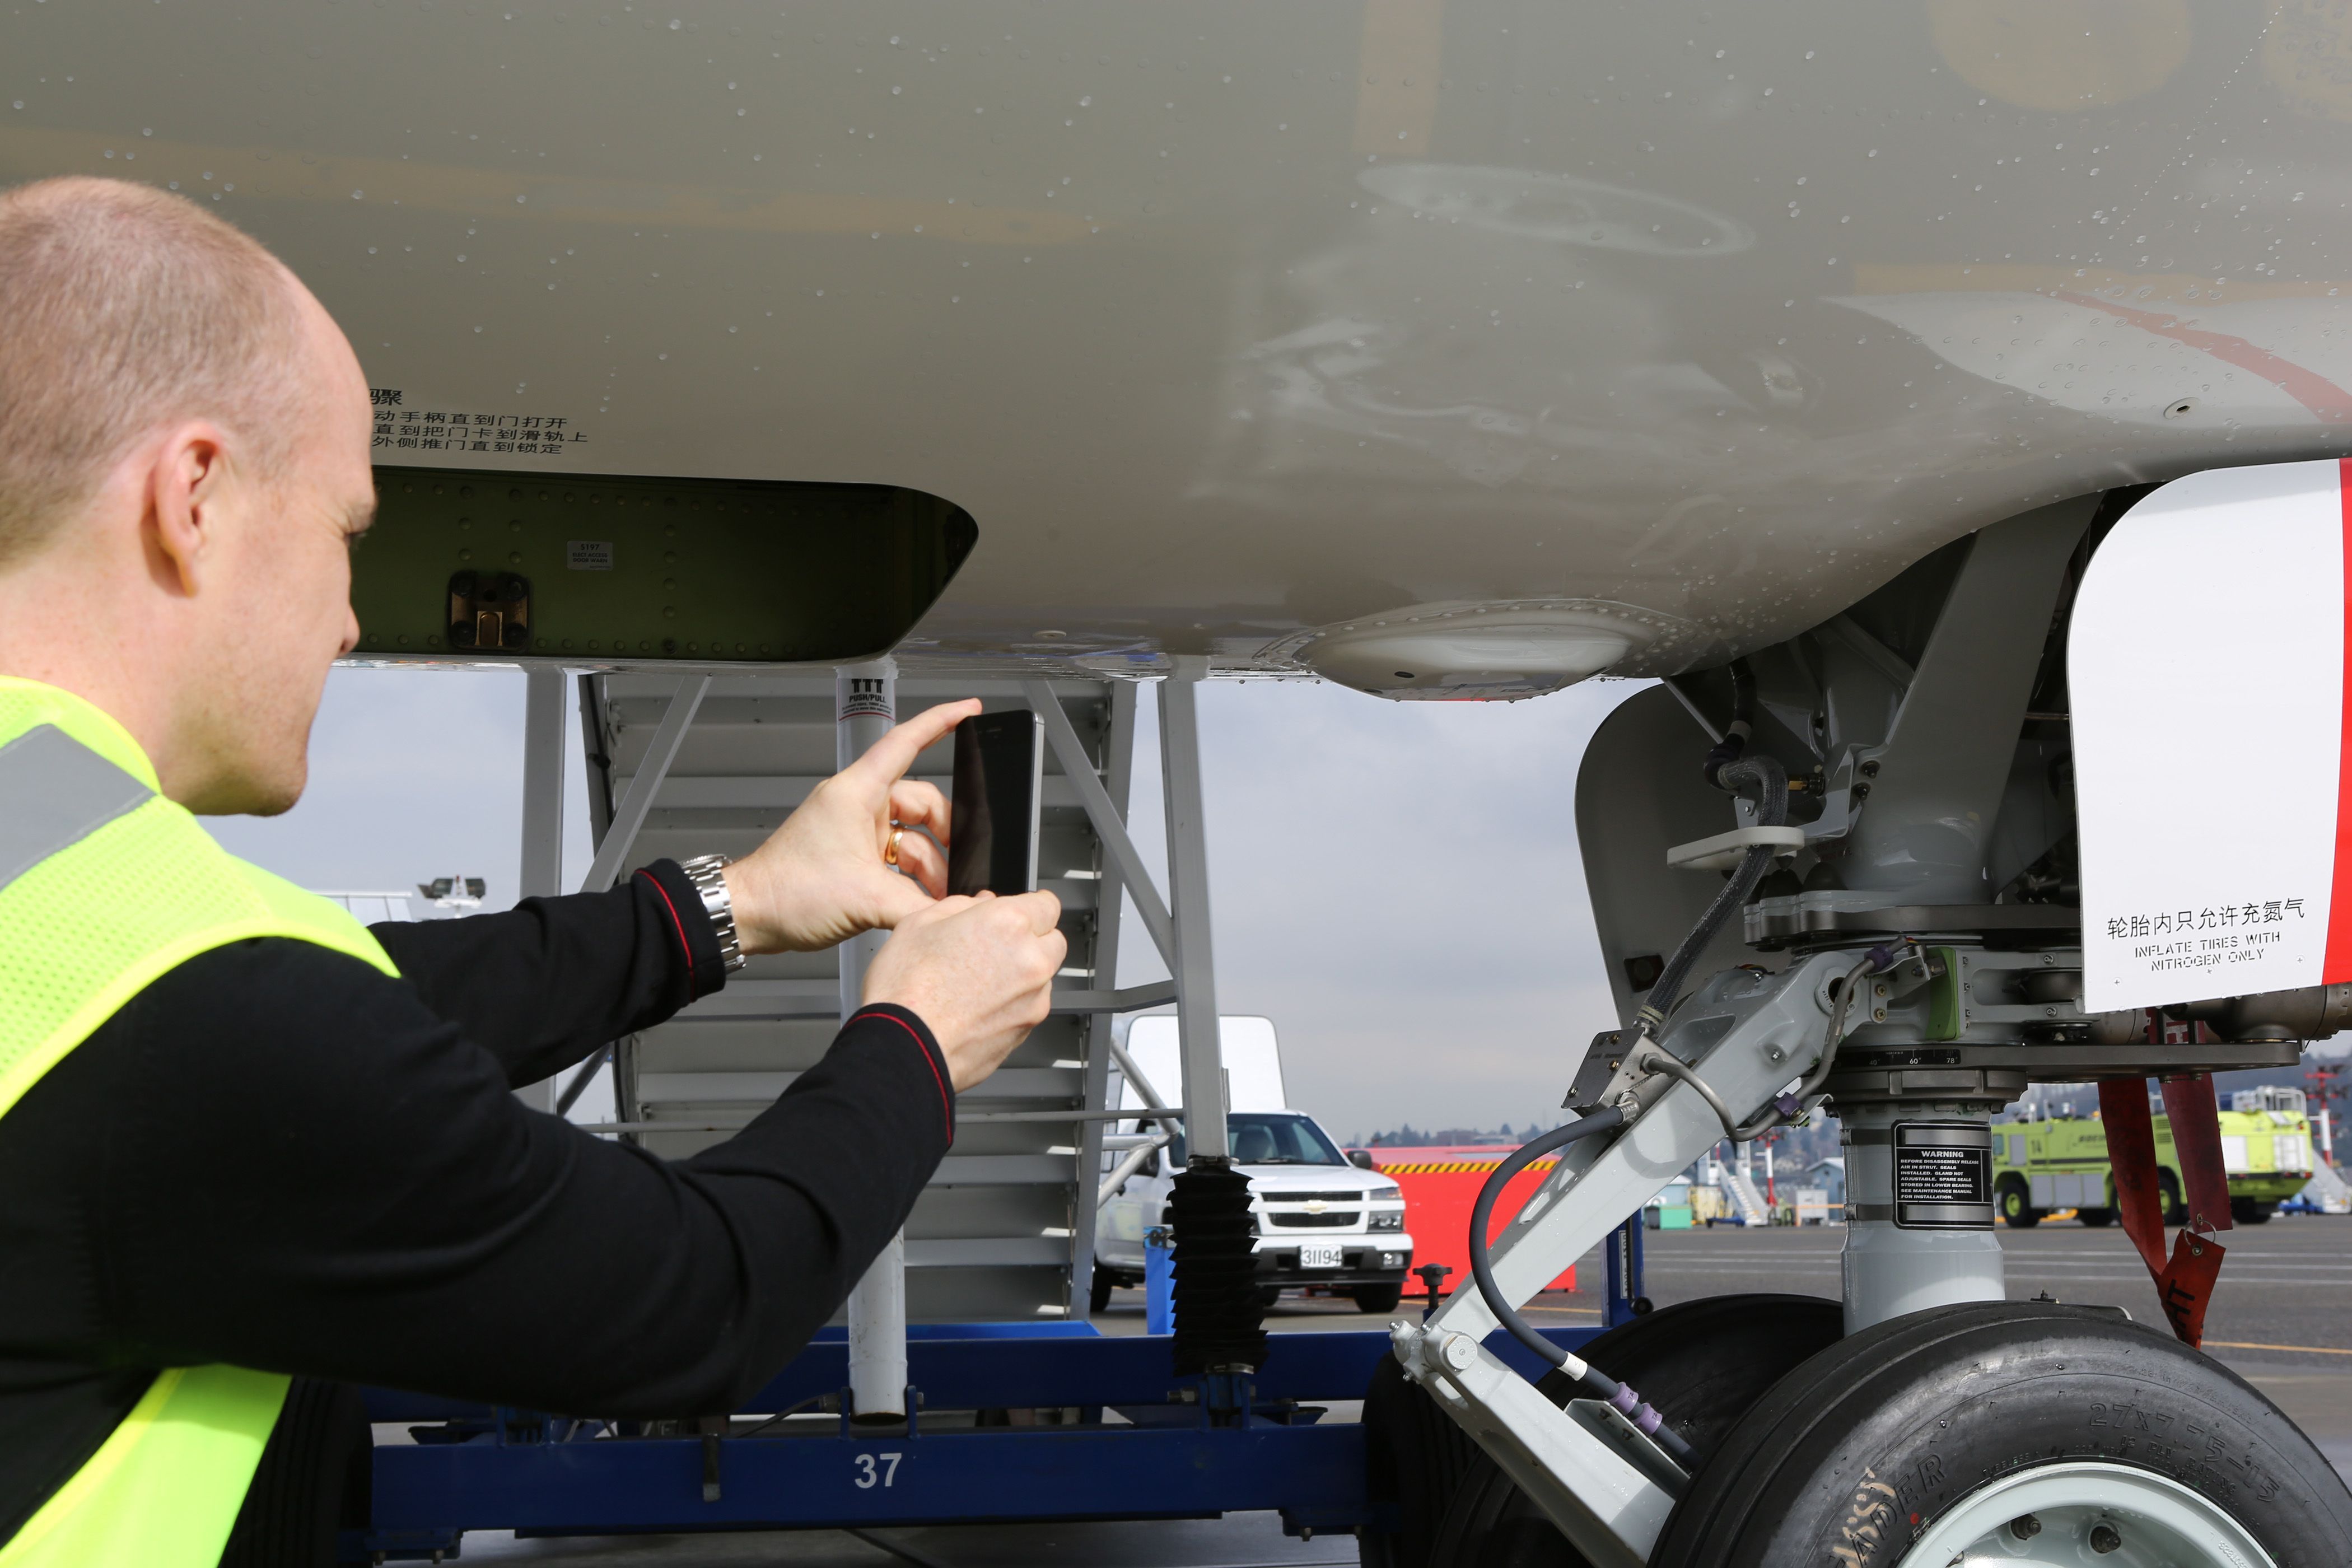 Boeing rolls out iPad app suite for airplane maintenance crews